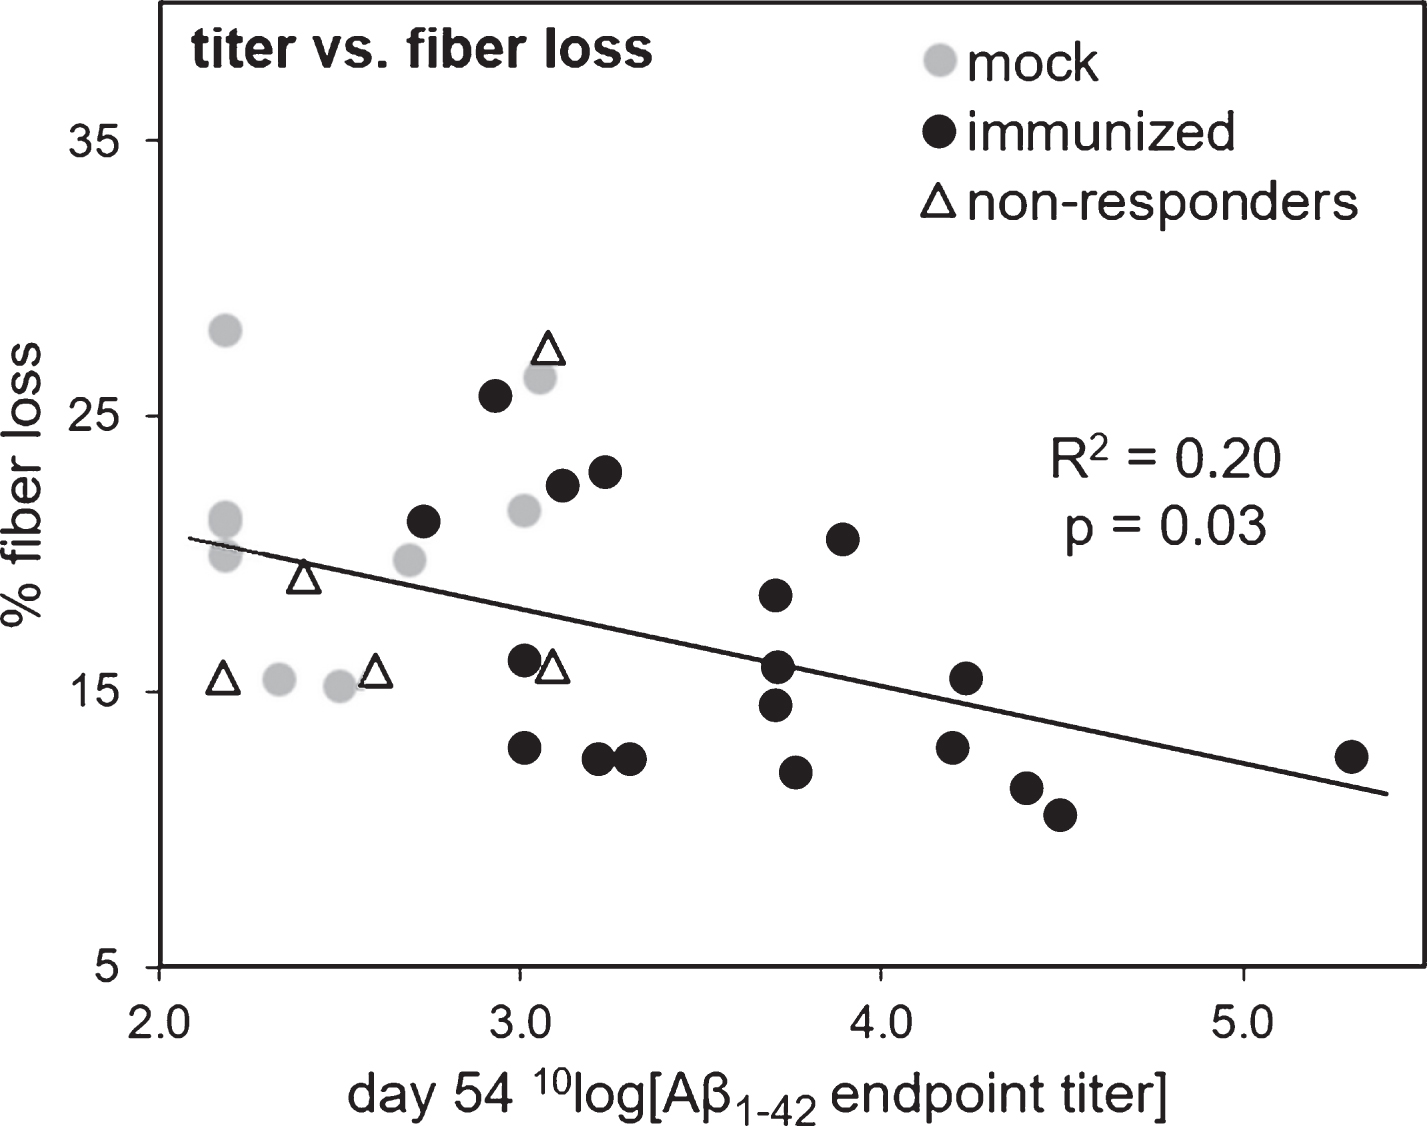 Correlation of the 10log value of anti-oligomeric Aβ1-42 endpoint titers (x-axis) versus cholinergic fiber loss (y-axis). Titers were obtained by ELISA of sera obtained from blood samples taken from the tail vein on day 54 (ELISA 1), after which all mice had received three immunization injections. Percentage of fiber loss was calculated for each animal based on ChAT-stained cholinergic fiber density in the bilateral parietal neocortex, which is the target of afferent cholinergic pathways from the bilateral NBM sites. The Aβ1-42 injected lesion side of the brain was compared to the scrambled-Aβ1-42 injected control side of the brain to determine the percentage of cholinergic fiber loss. The linear regression line and Pearson correlation is based on the immunized mice (indicated by black circles) including the non-responders (separately indicated by open triangles), but not including the mock mice (indicated by grey circles). The R-squared and two-tailed p-value is indicated in the figure.